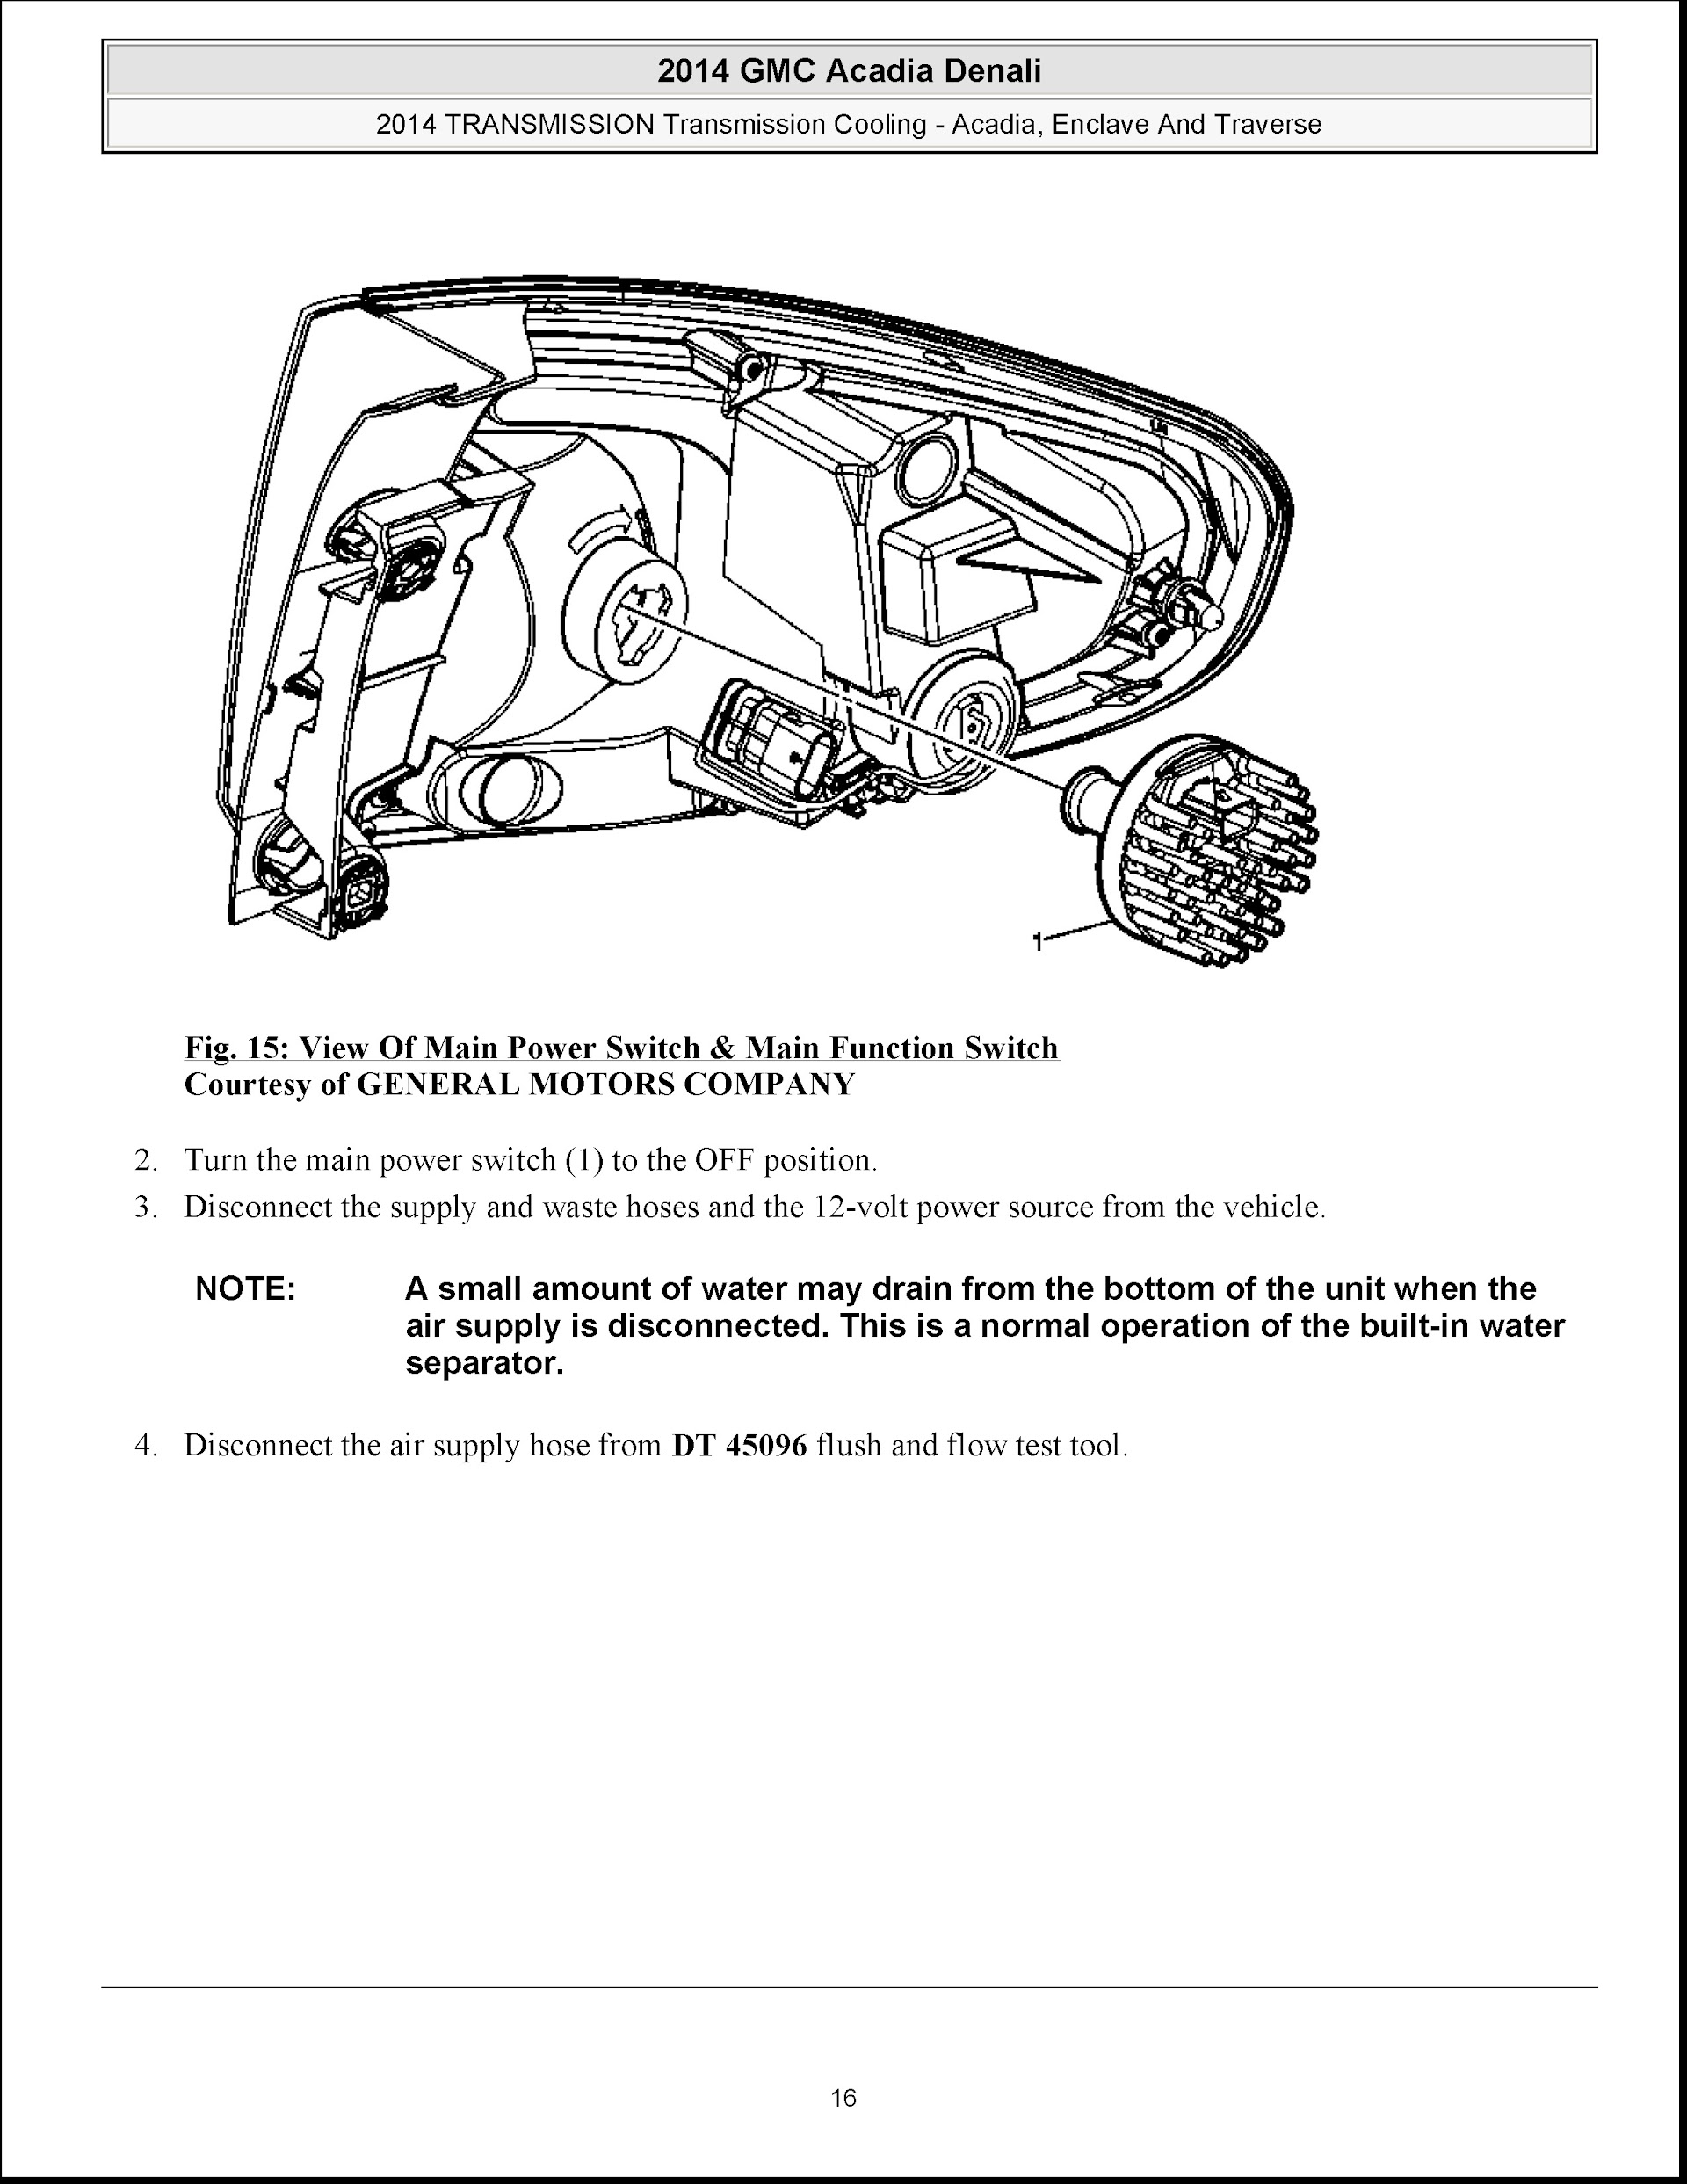 2013-2016 GMC Acadia Repair Manual (Denali, Enclave and Chevrolet Traverse), Trasnmission System